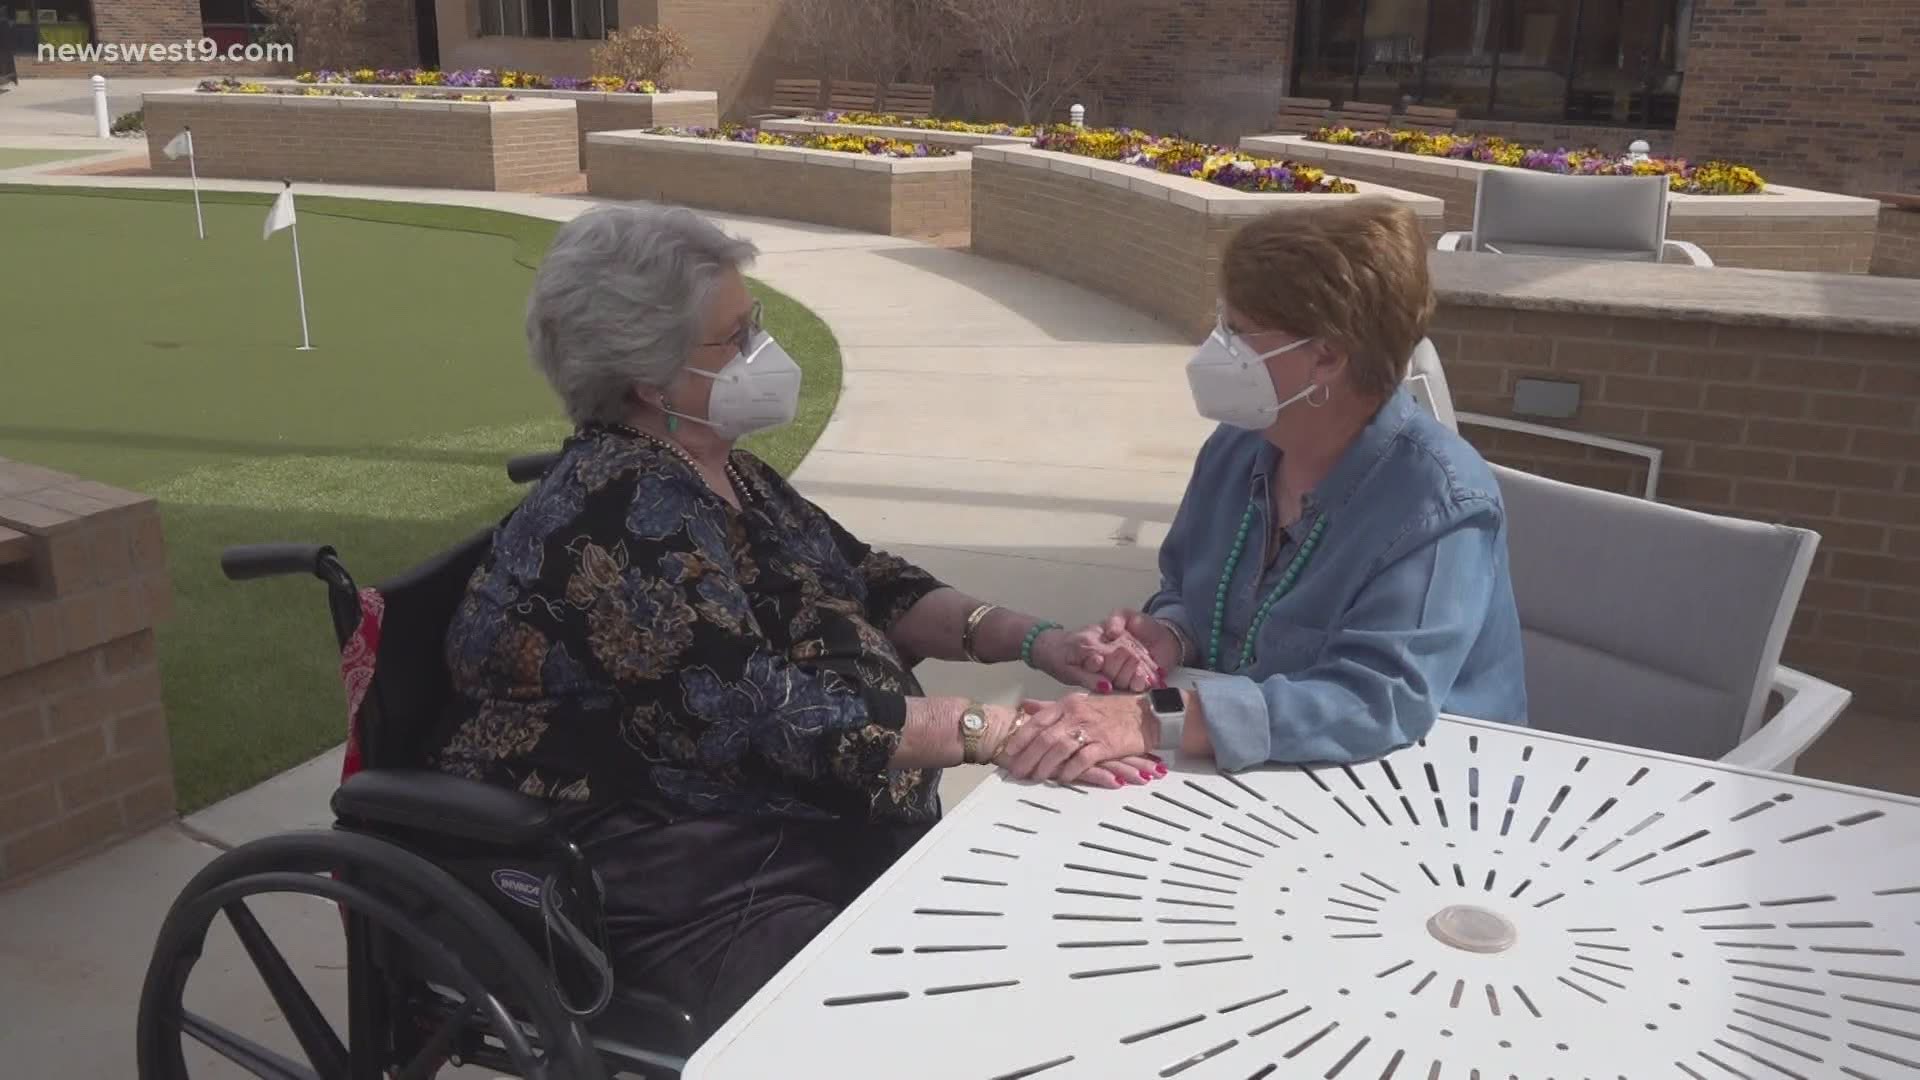 Joann Scott and Carolyn Thompson finally got the reunion they've been waiting for.